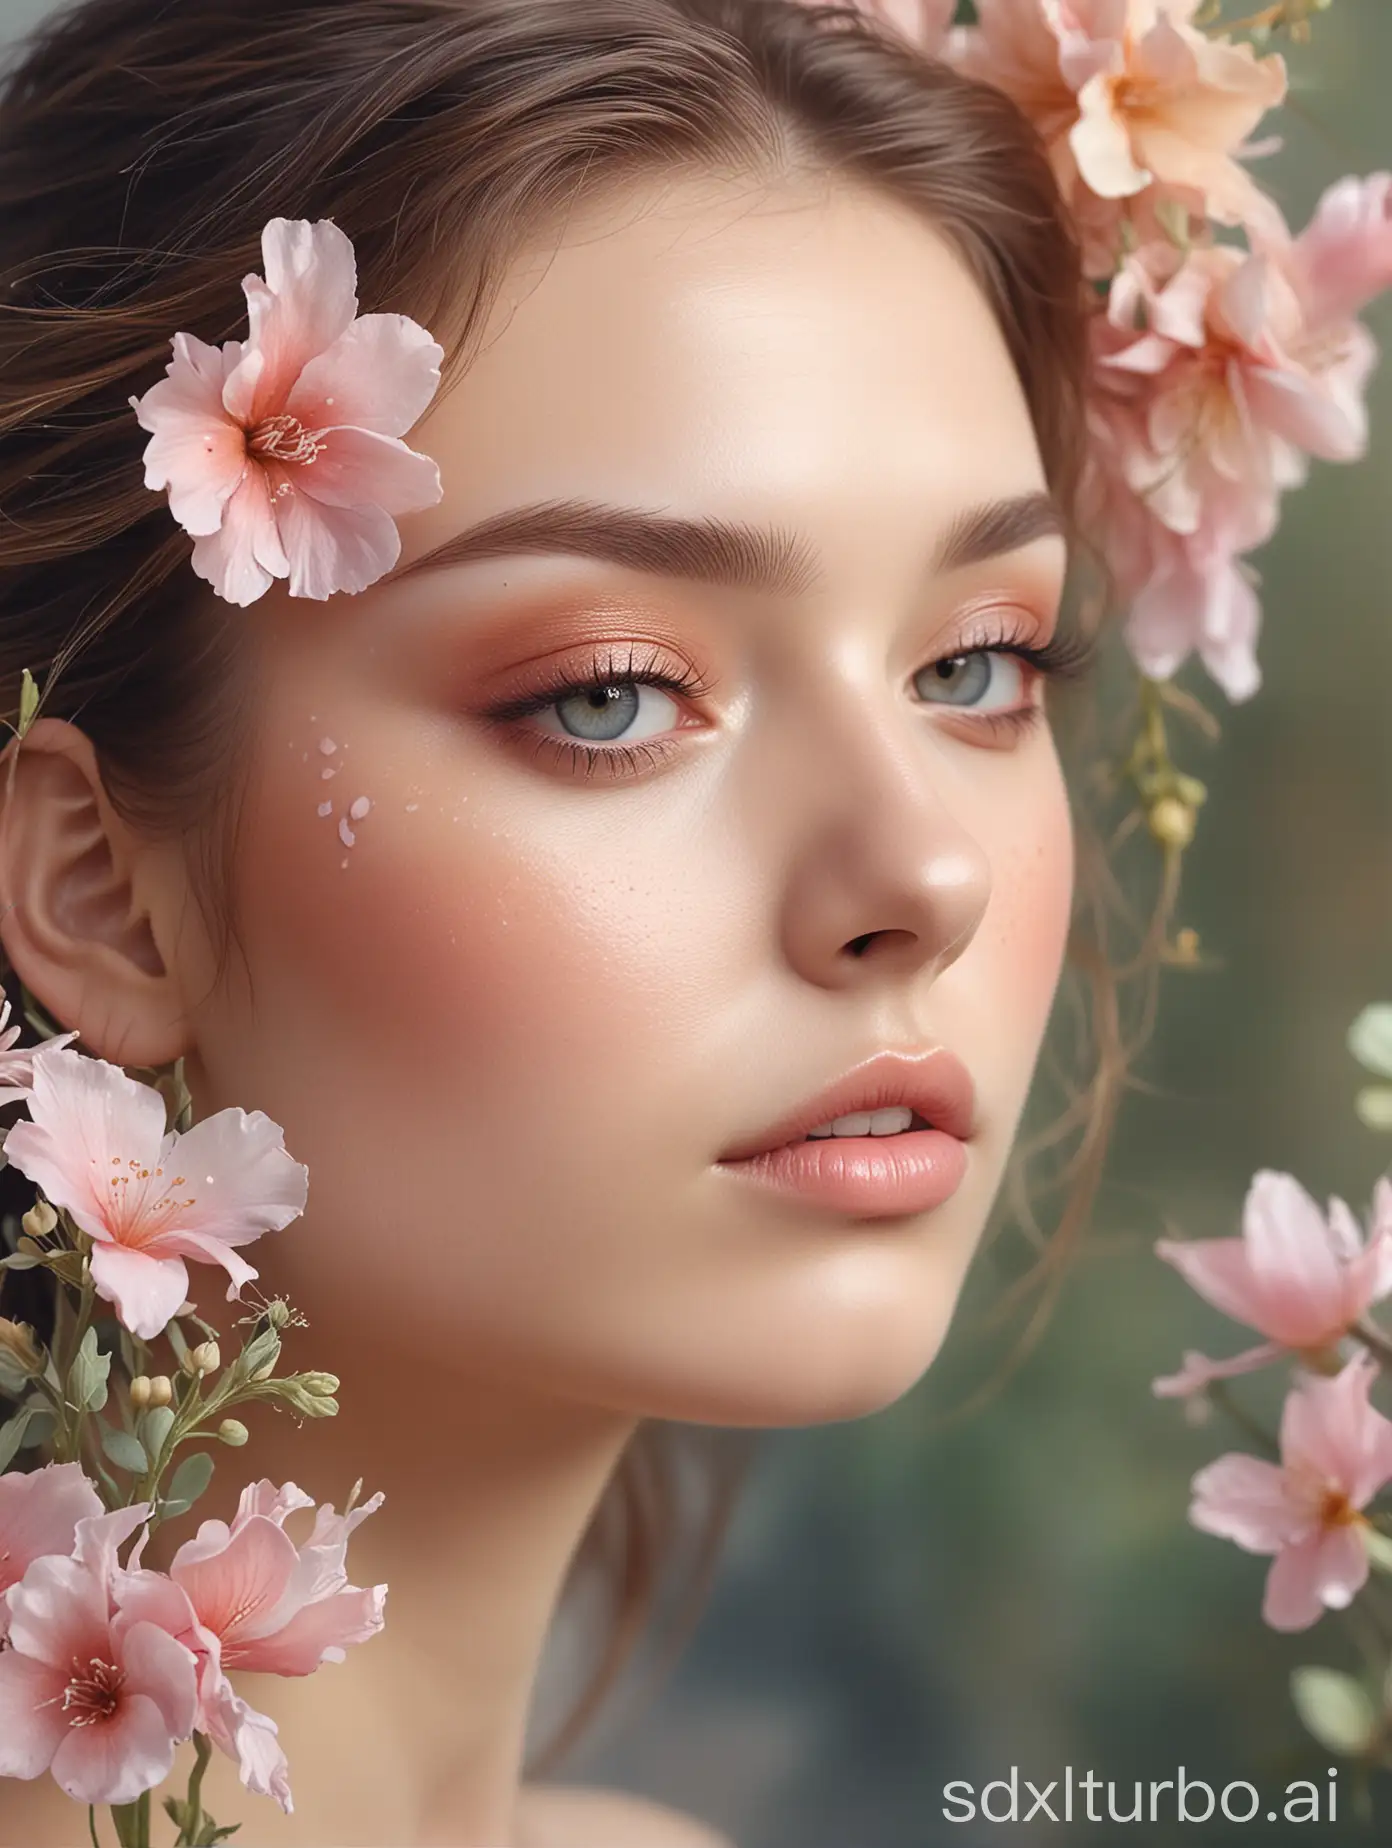 Ethereal-Watercolor-Makeup-Portrait-in-Soft-Floral-Ambiance